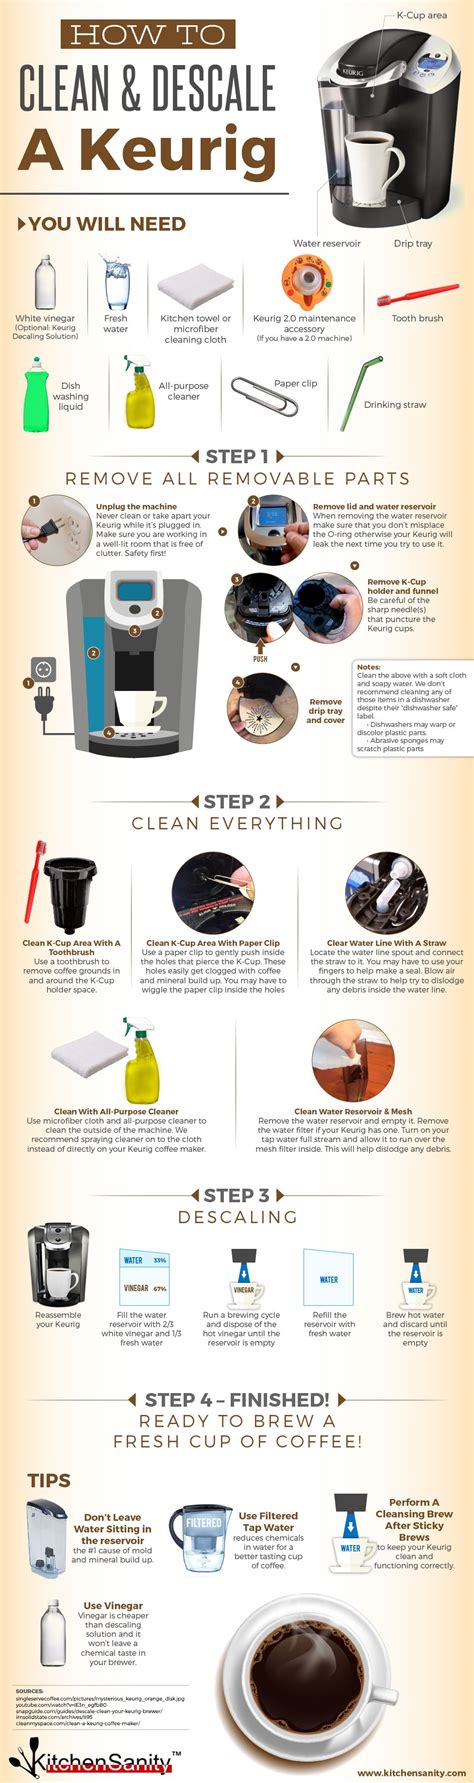 how to descal keurig - laminaty-zpts.pl